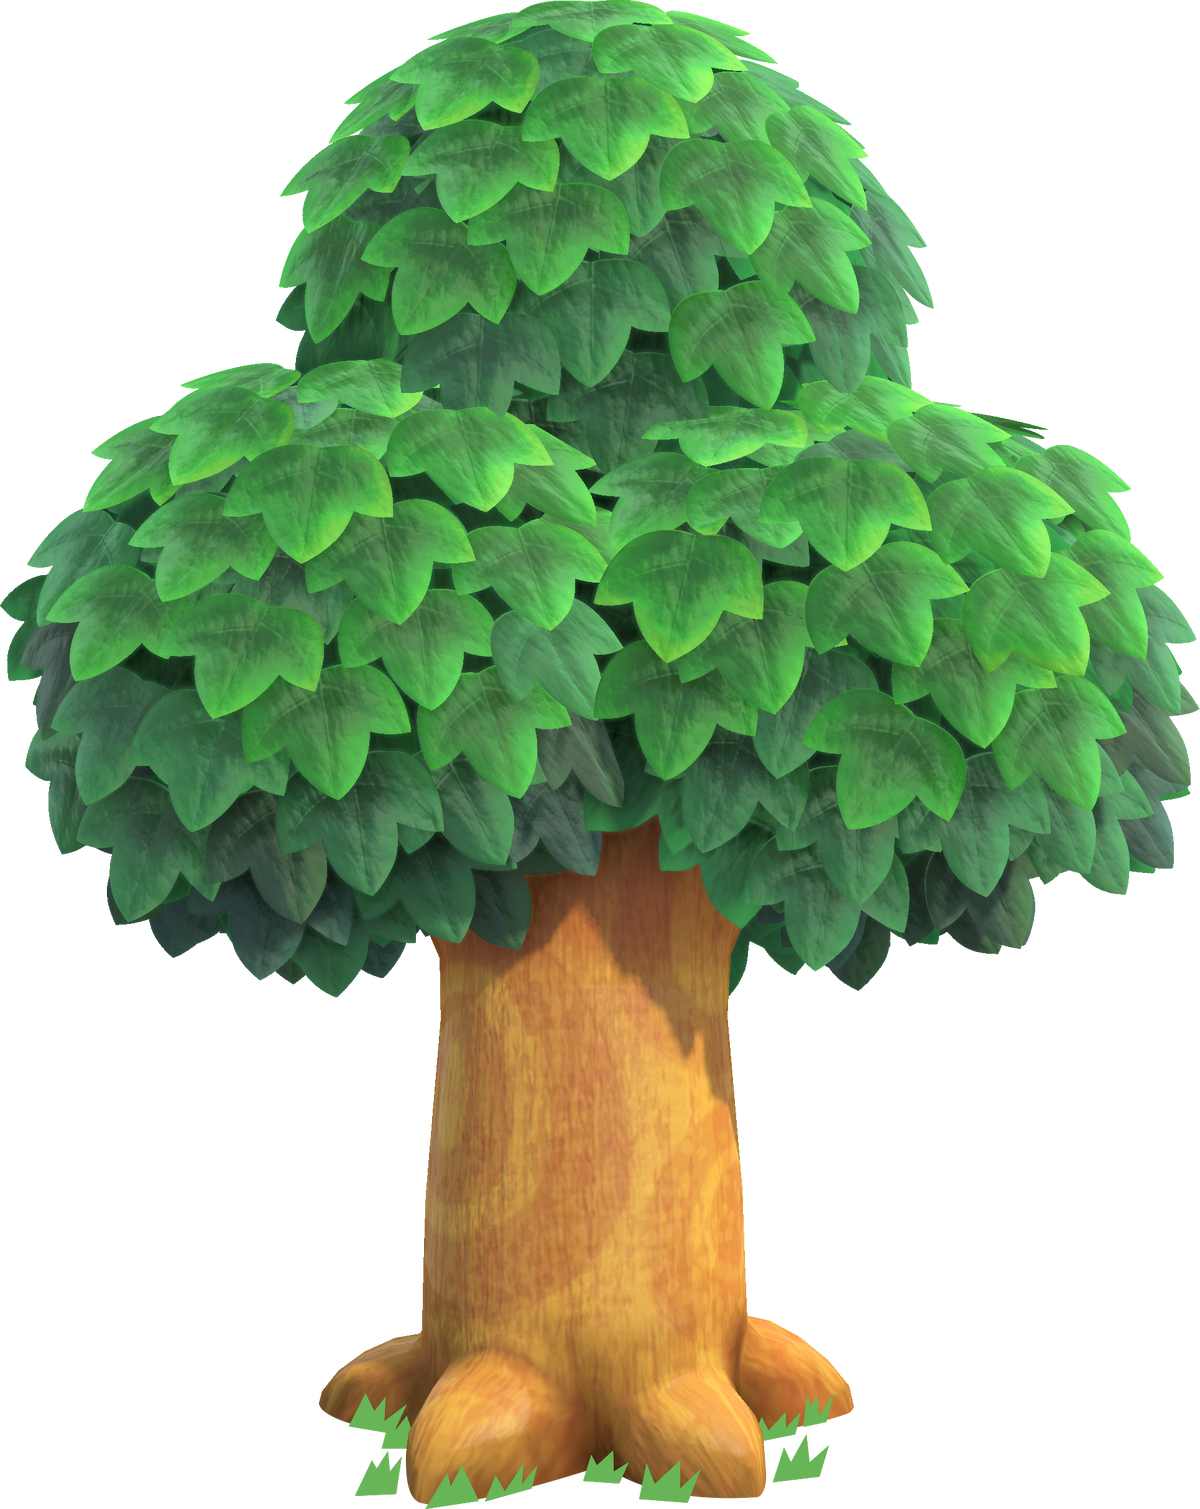 https://static.wikia.nocookie.net/animalcrossing/images/a/ab/NH-Arbre-Feuillu.png/revision/latest/scale-to-width-down/1200?cb=20200611212531&path-prefix=fr